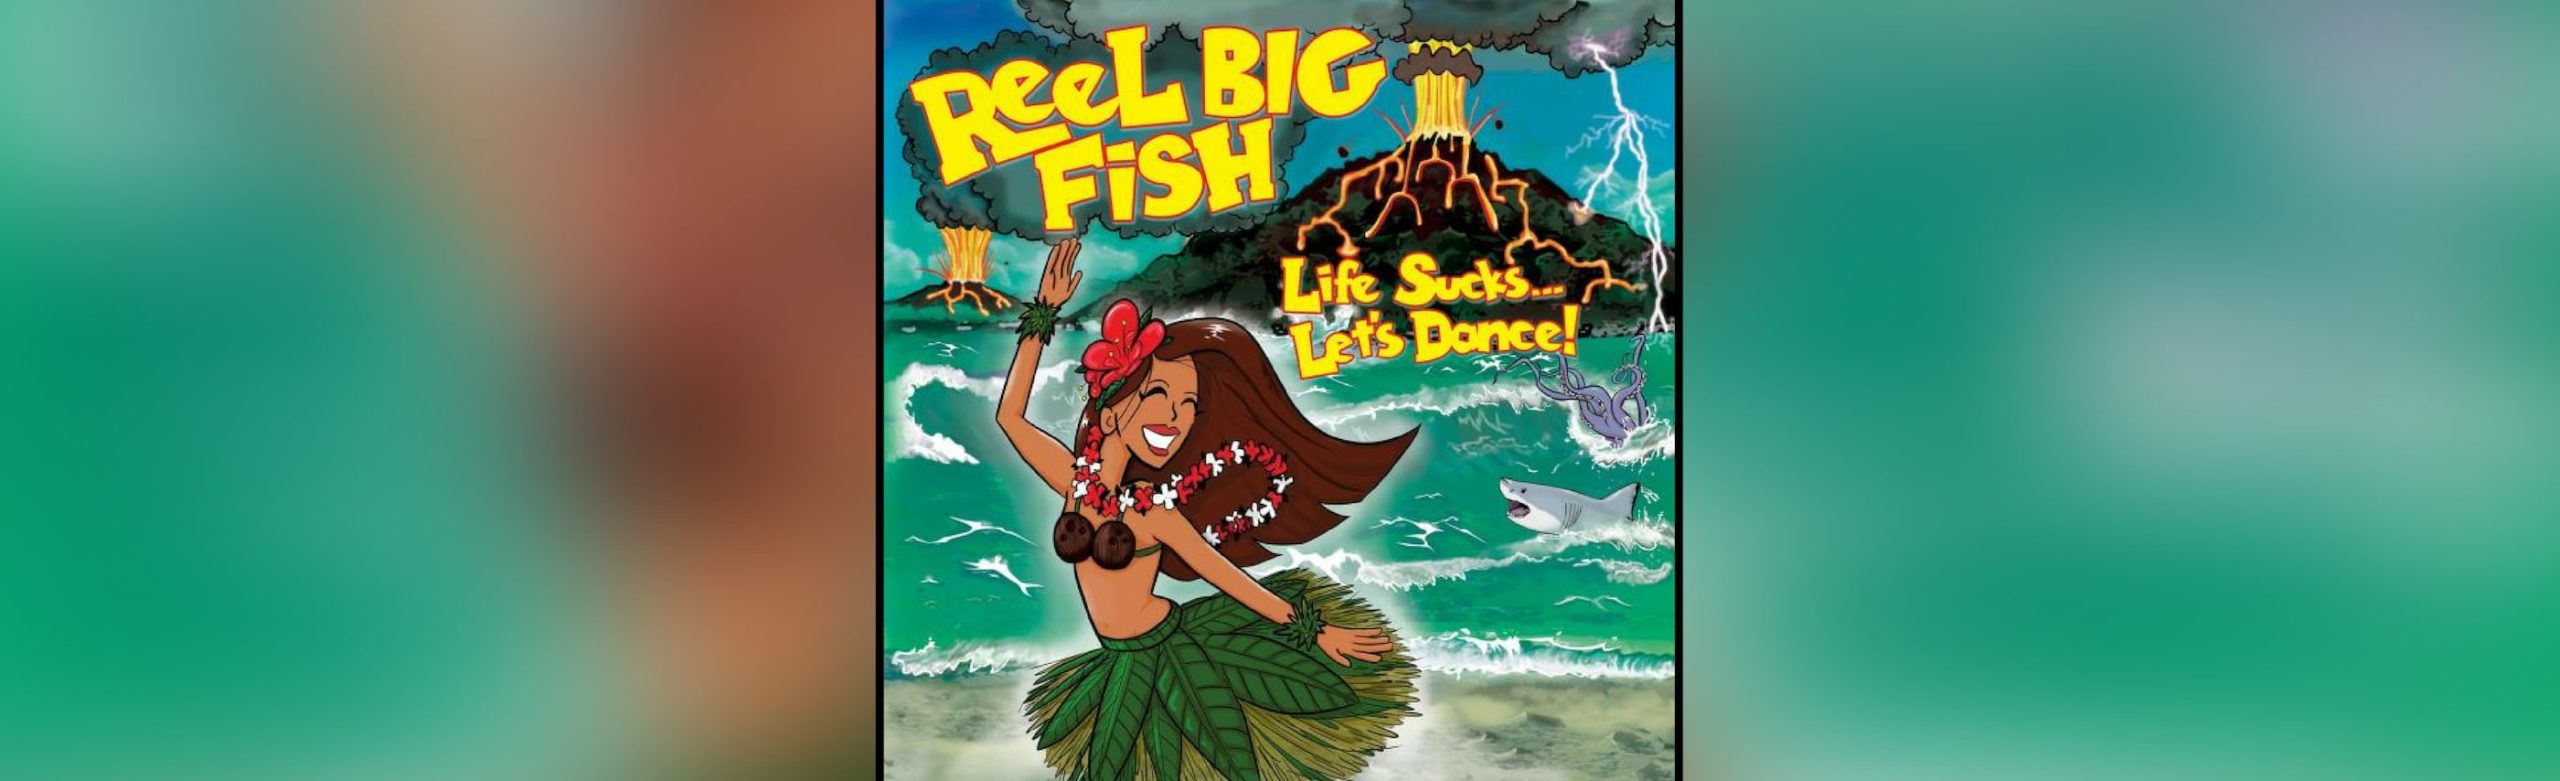 “Life Sucks… Let’s Dance!” by Reel Big Fish out now Image